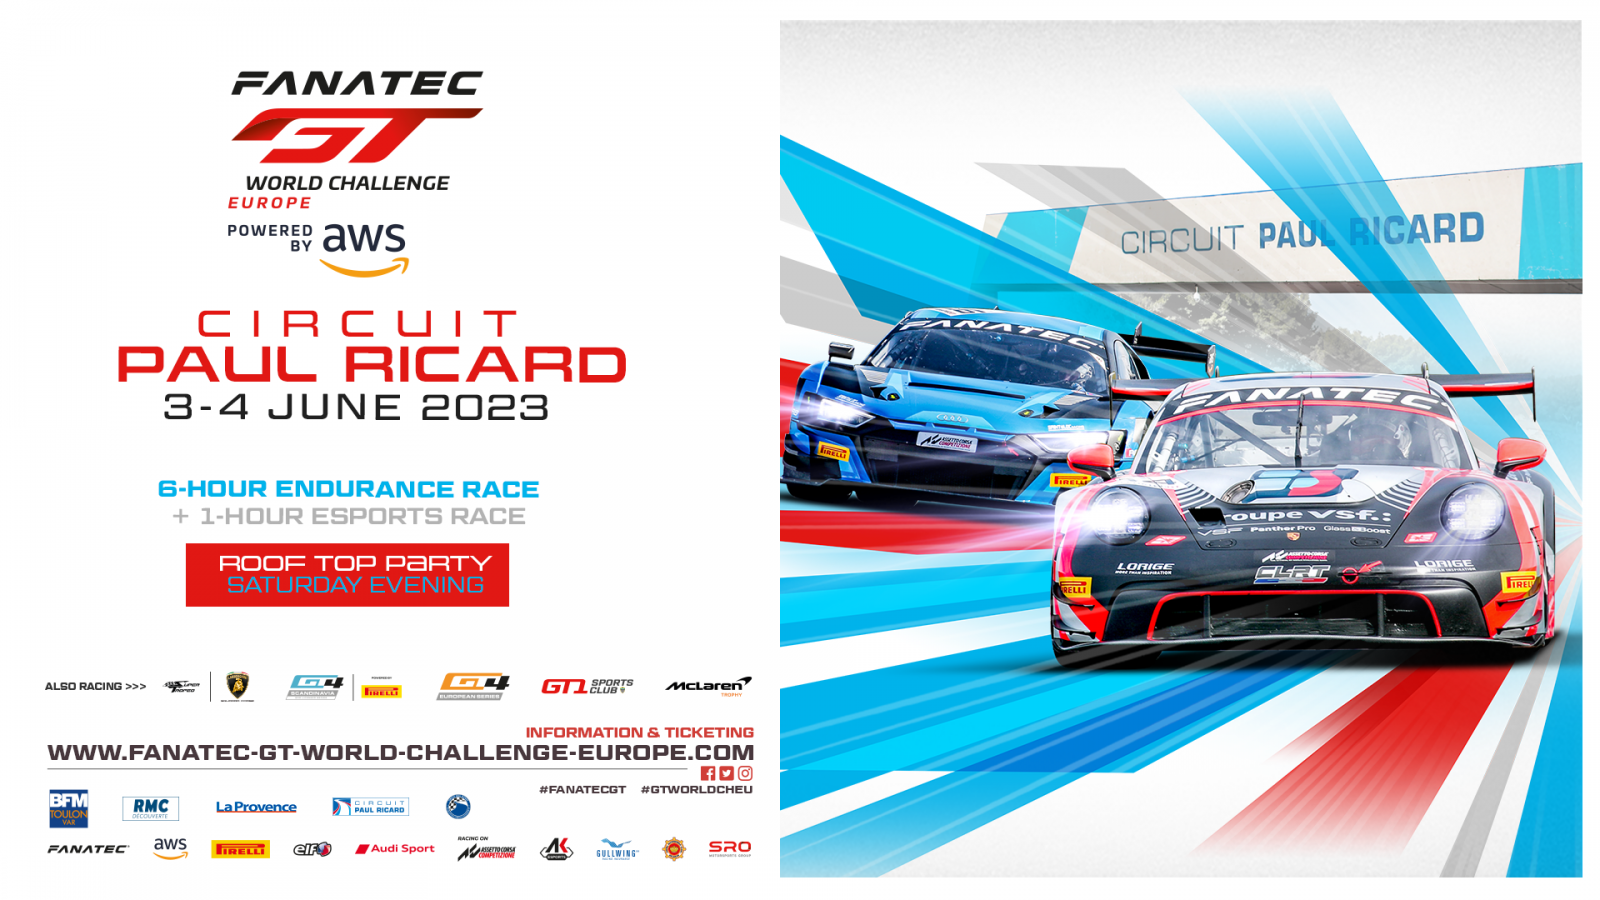 Expect the spectacular as Fanatec GT Europe plots a course for Circuit Paul Ricard